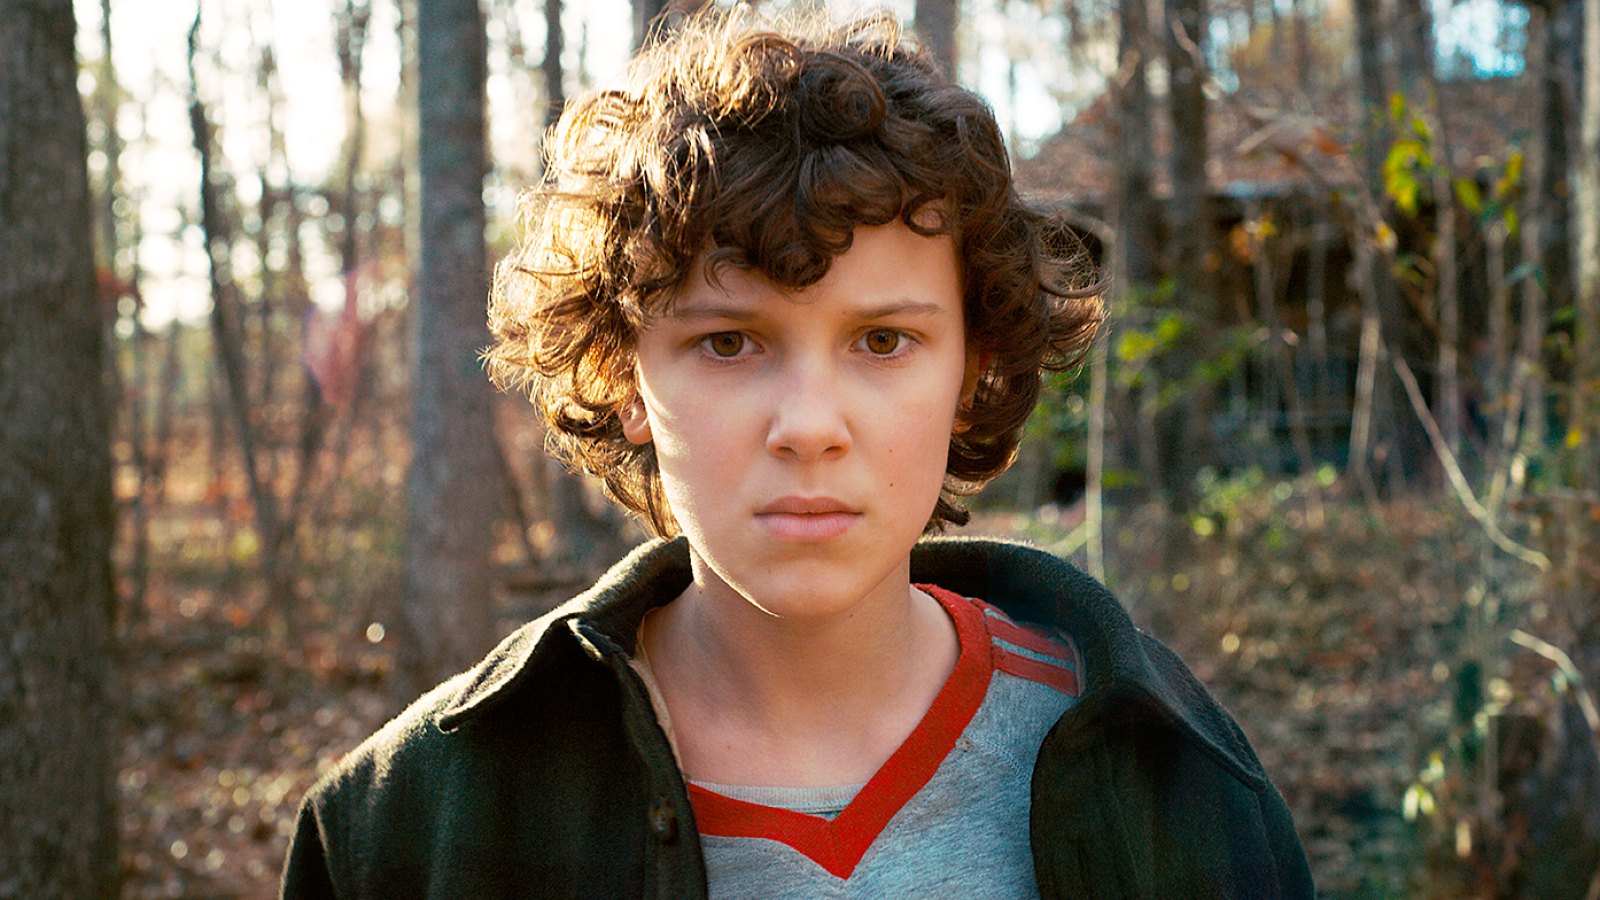 Everything You Need to Know About Stranger Things Season 2